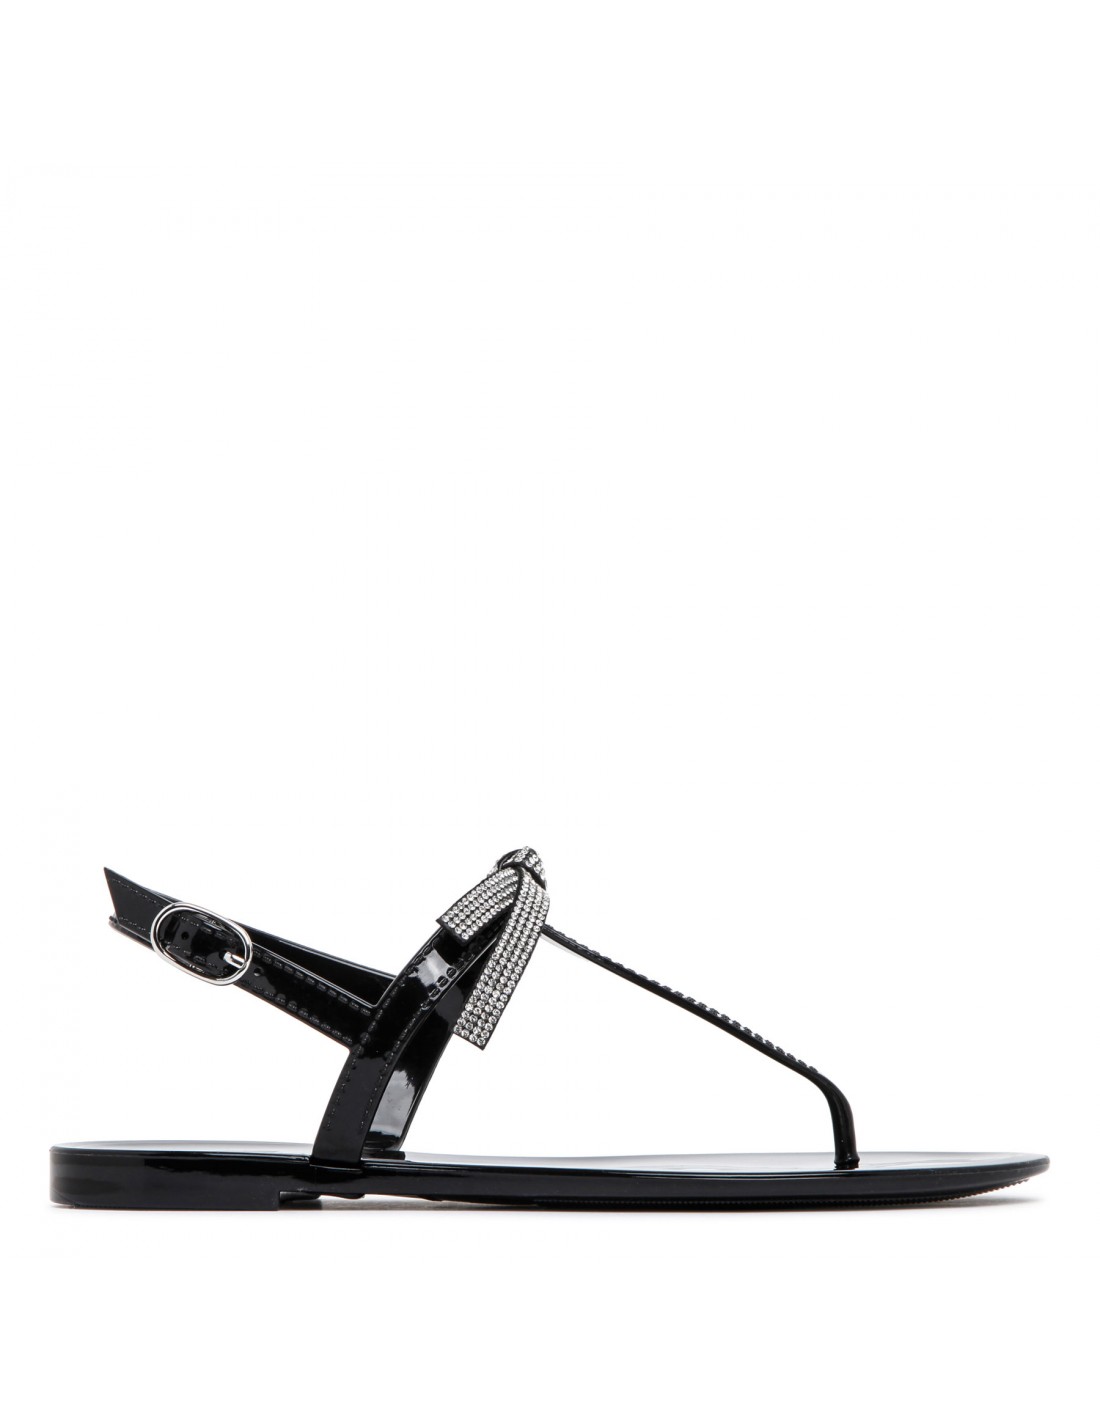 SW Bow Jelly black sandals